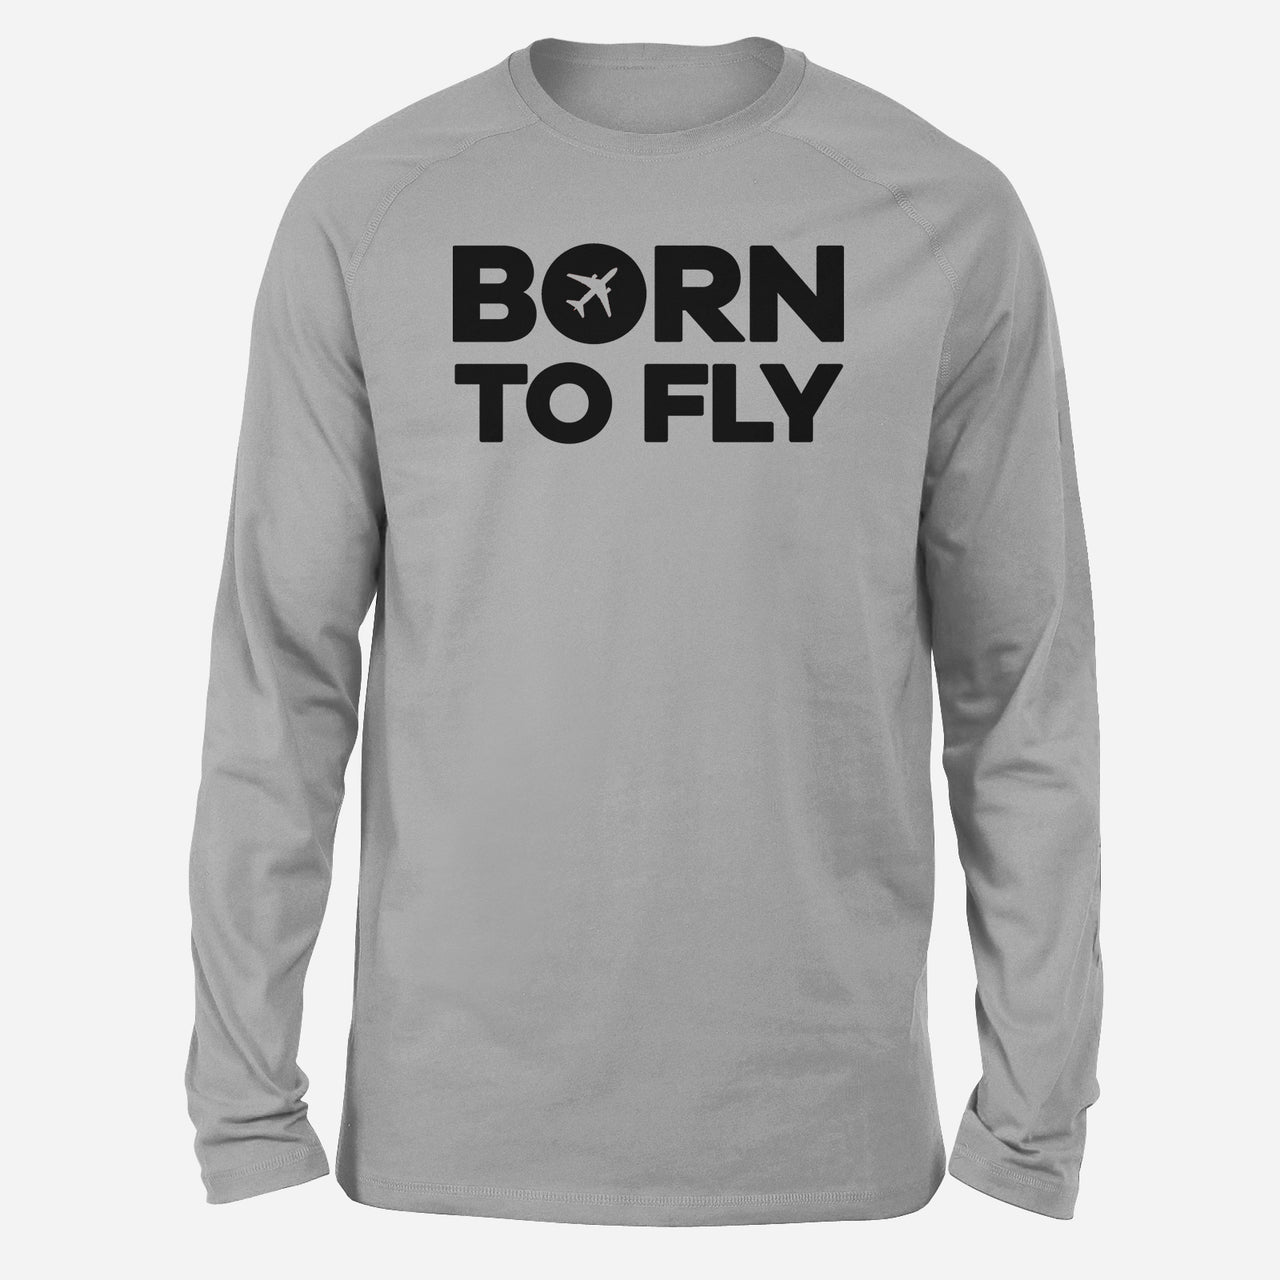 Born To Fly Special Designed Long-Sleeve T-Shirts